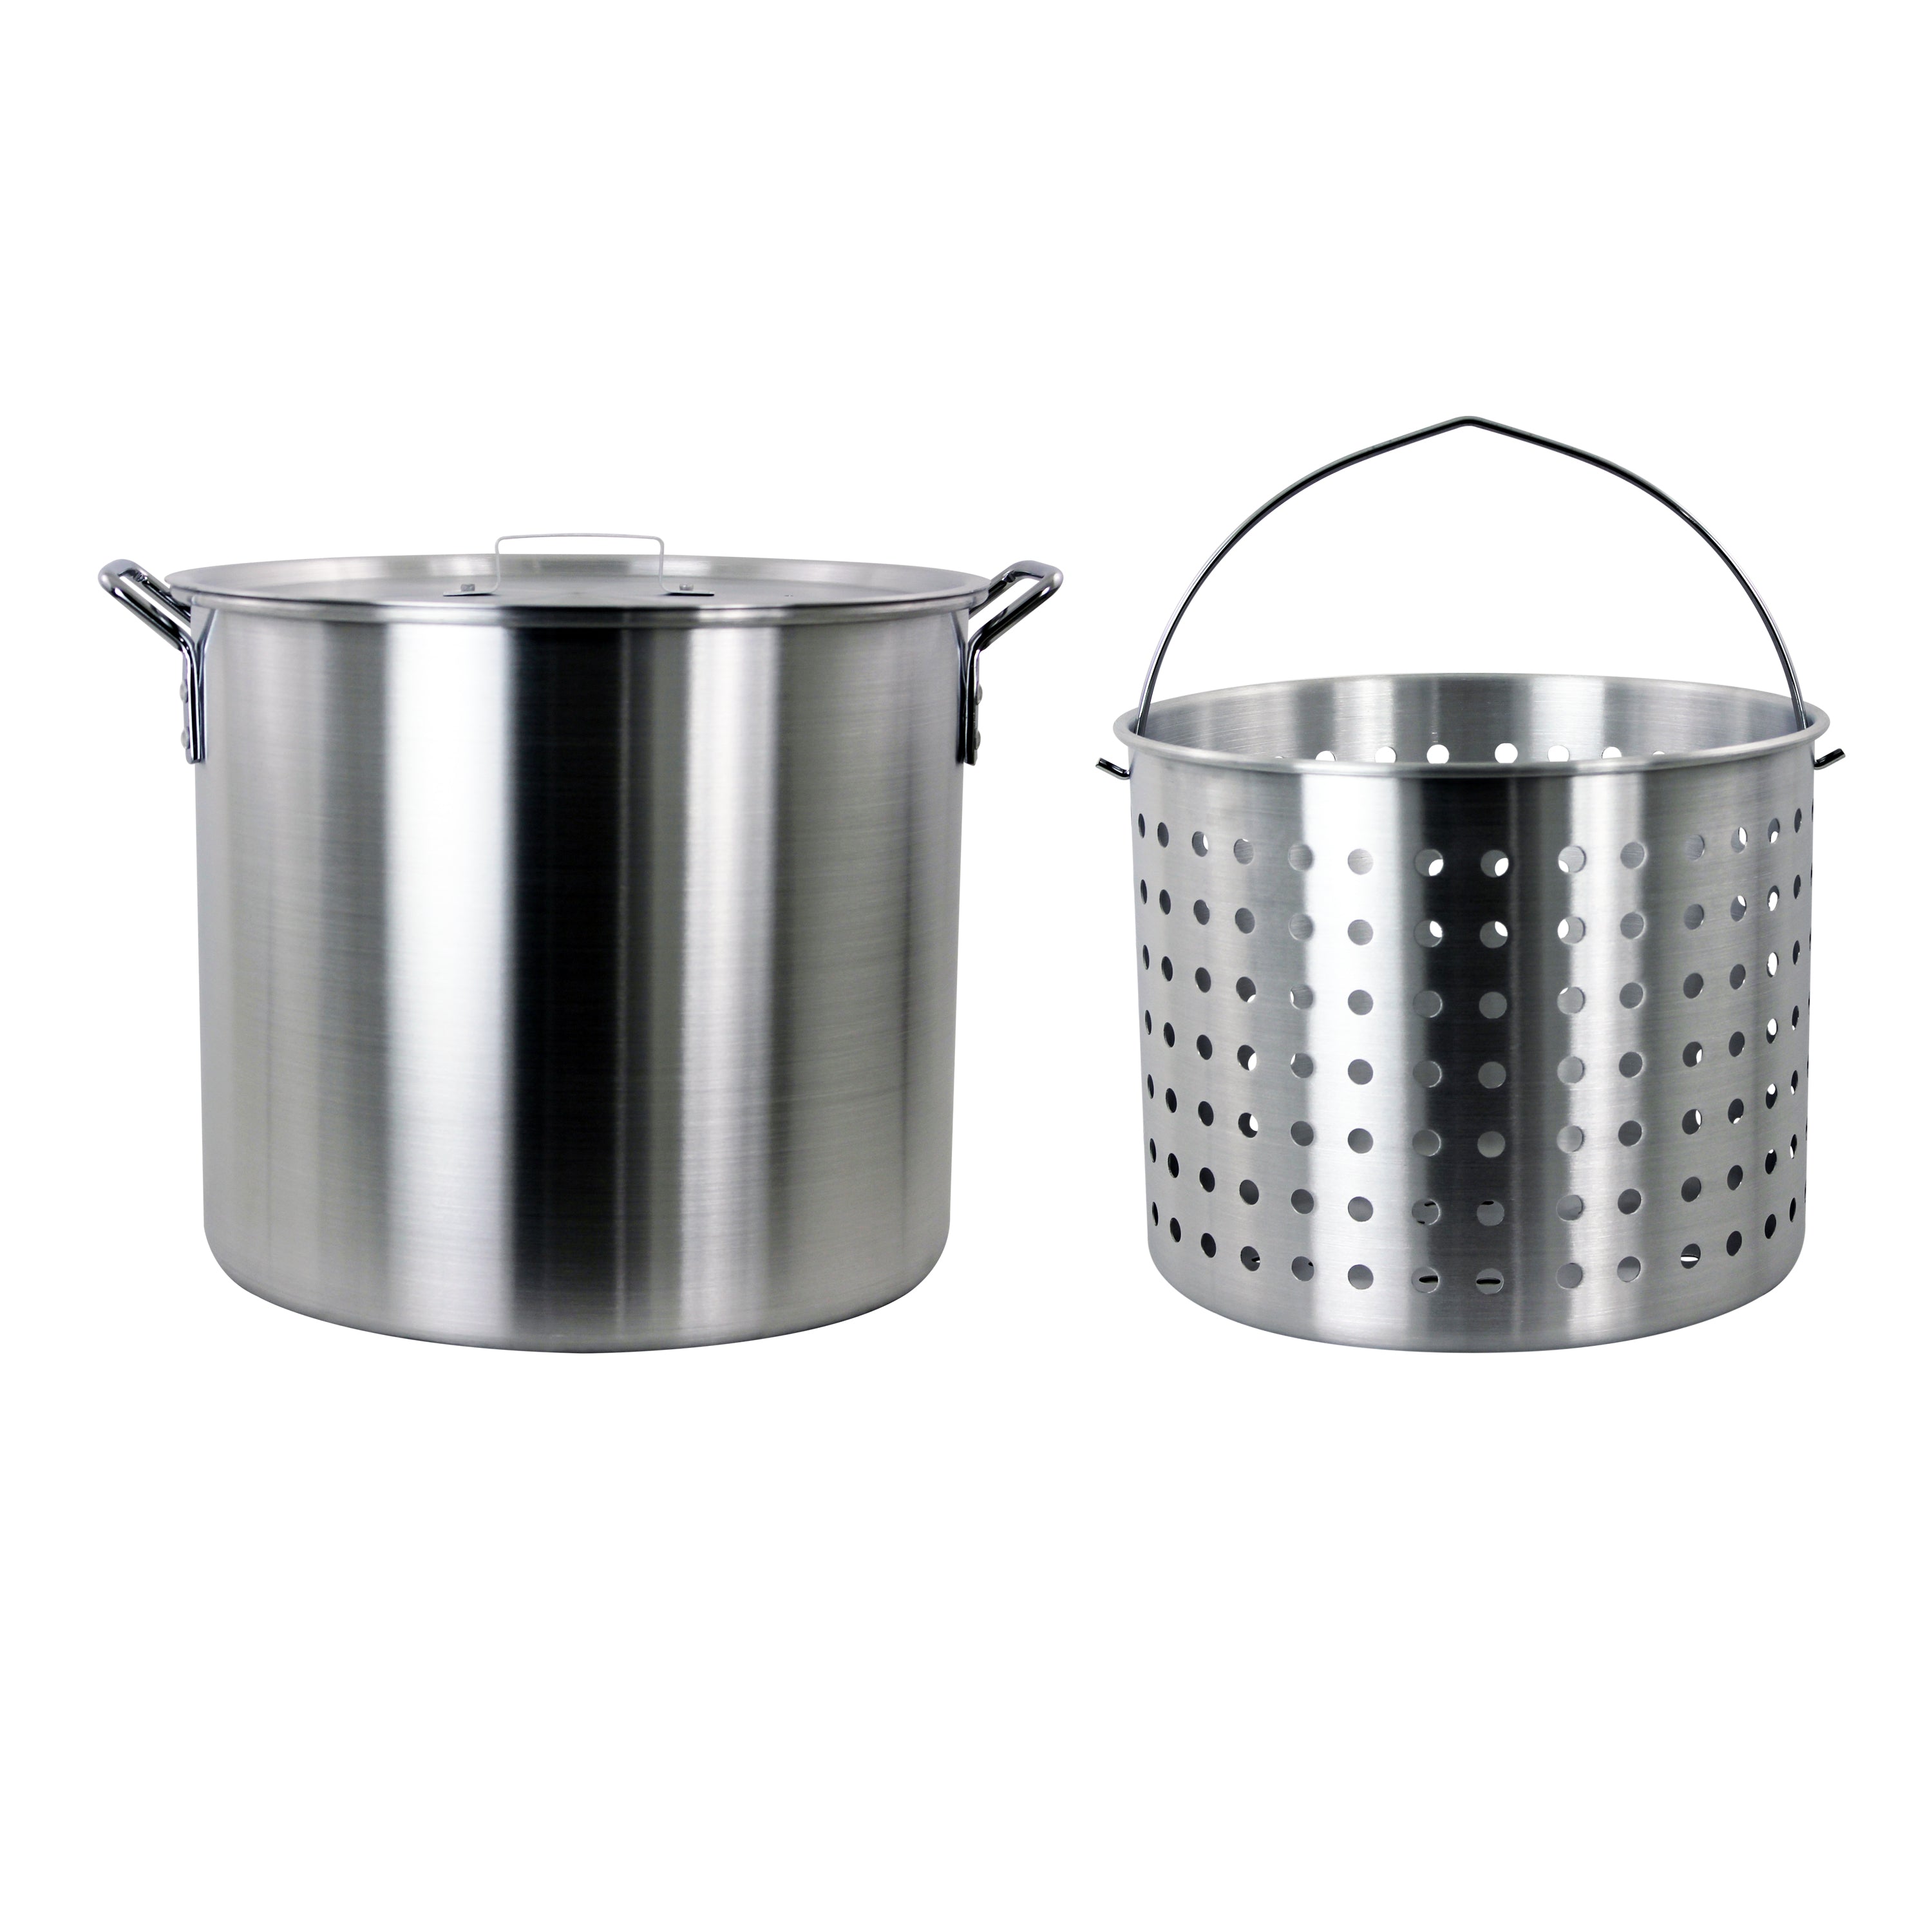 Chard ASP30 Aluminum Stock Pot and Perforated Strainer Basket Set